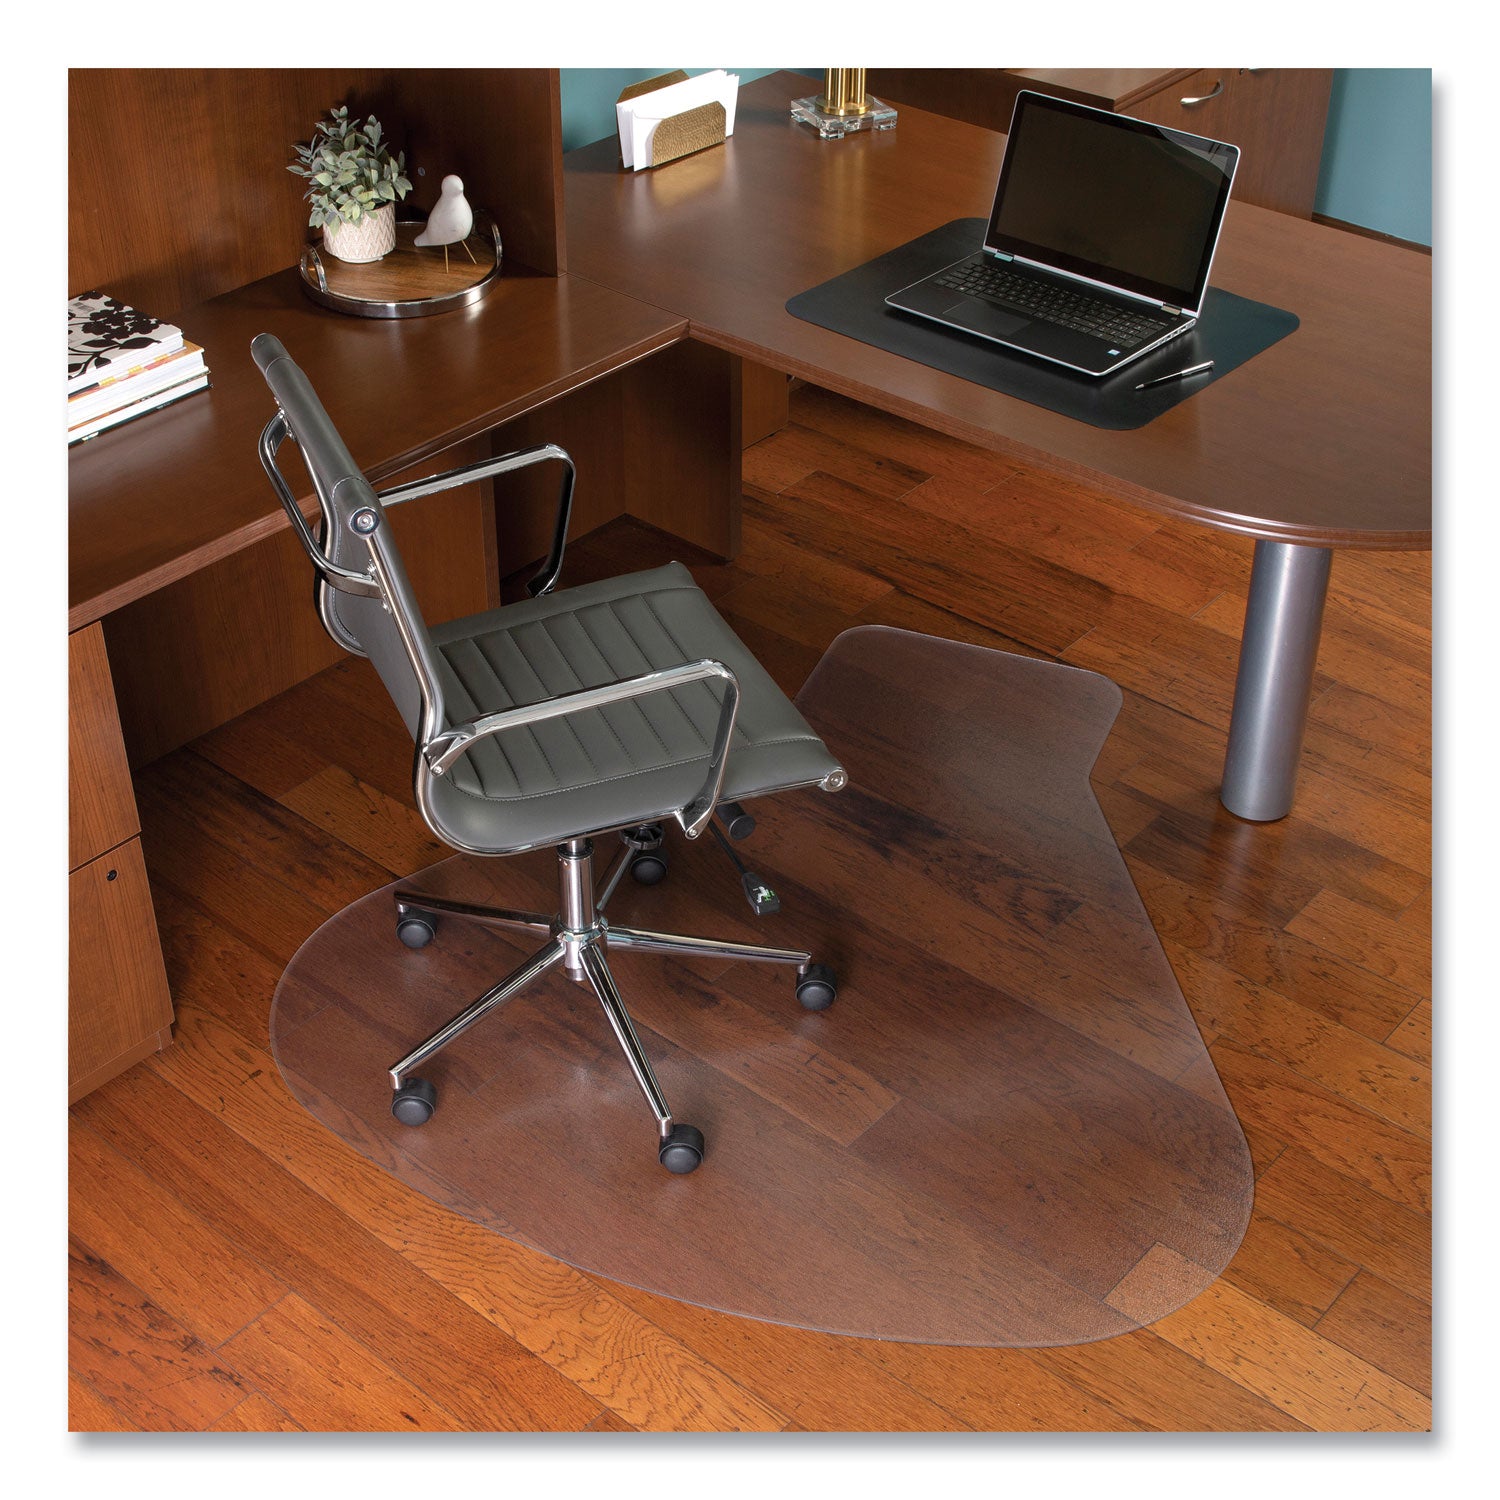 everlife-workstation-chair-mat-for-hard-floors-with-lip-66-x-60-clear_esr132775 - 1